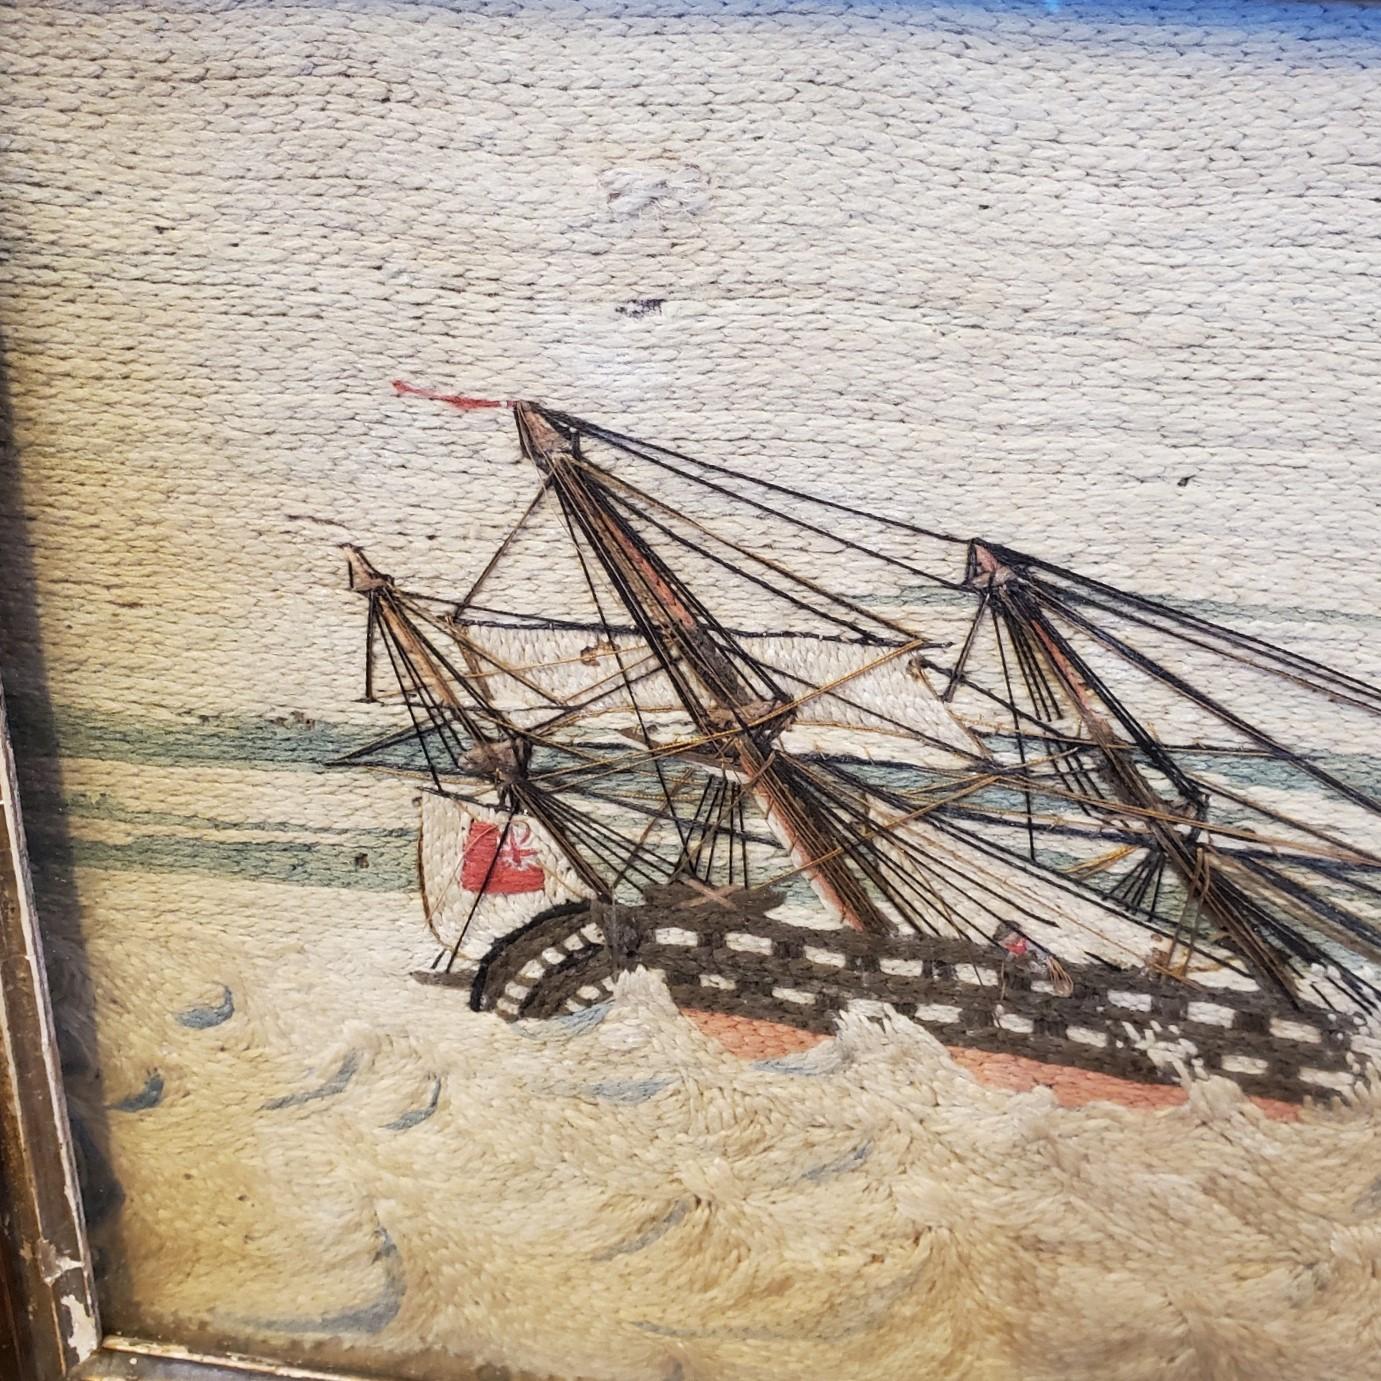 19th Century Sailor's Woolie of a Shipwreck, circa 1840, a woolwork depicting a British double decker warship battling heavy seas, having struck a sandbar and laid on beam ends with the pinkish-red copper clad bottom exposed and the bowsprit broken